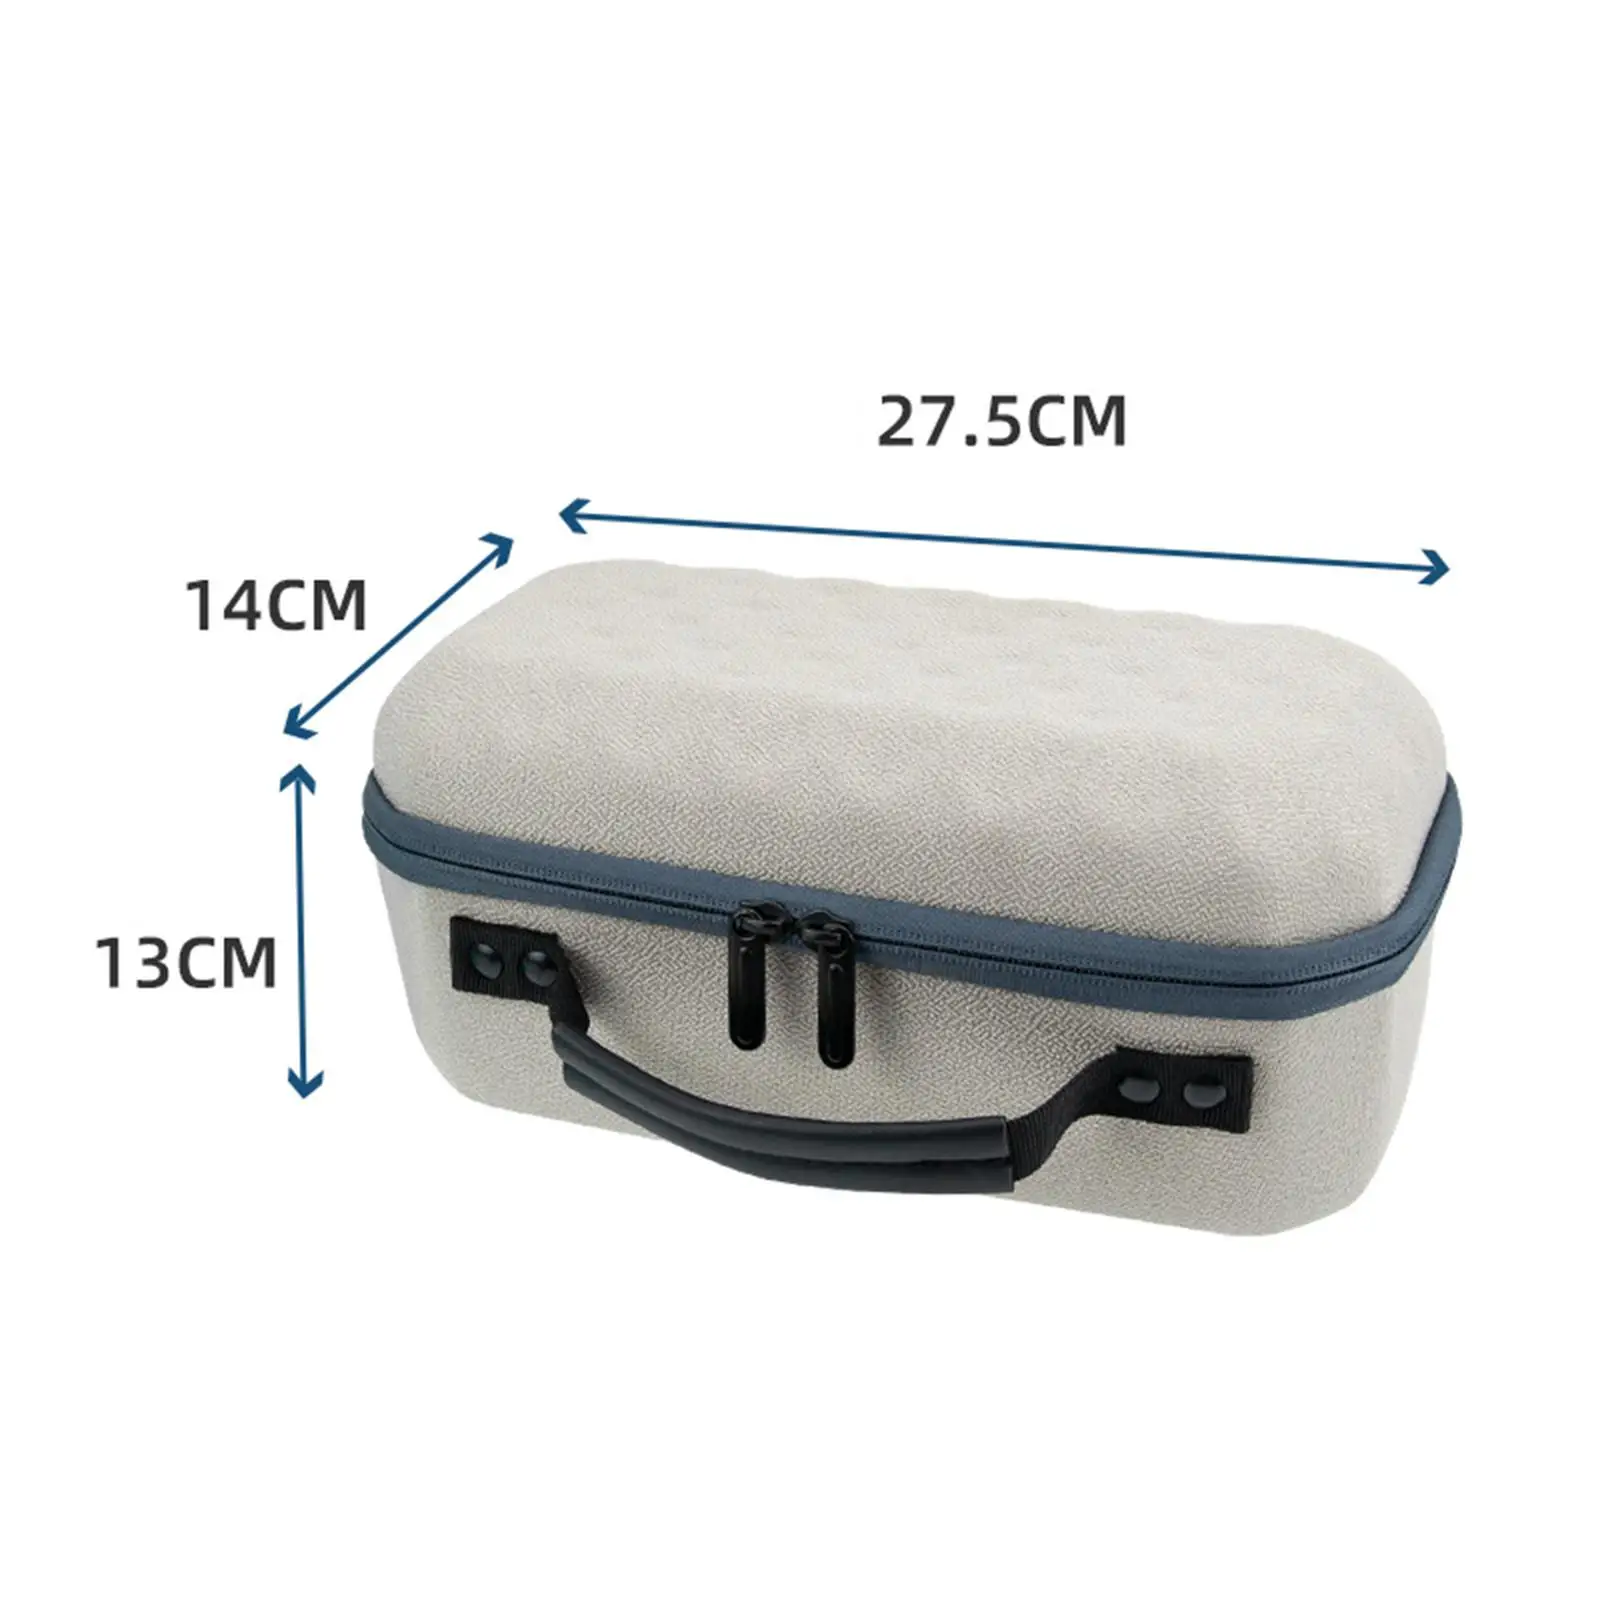 Portable Bag Storage Carrying Case Multifunctional Tool Bag Oxford Cloth Travel Bag for Mini Accessories